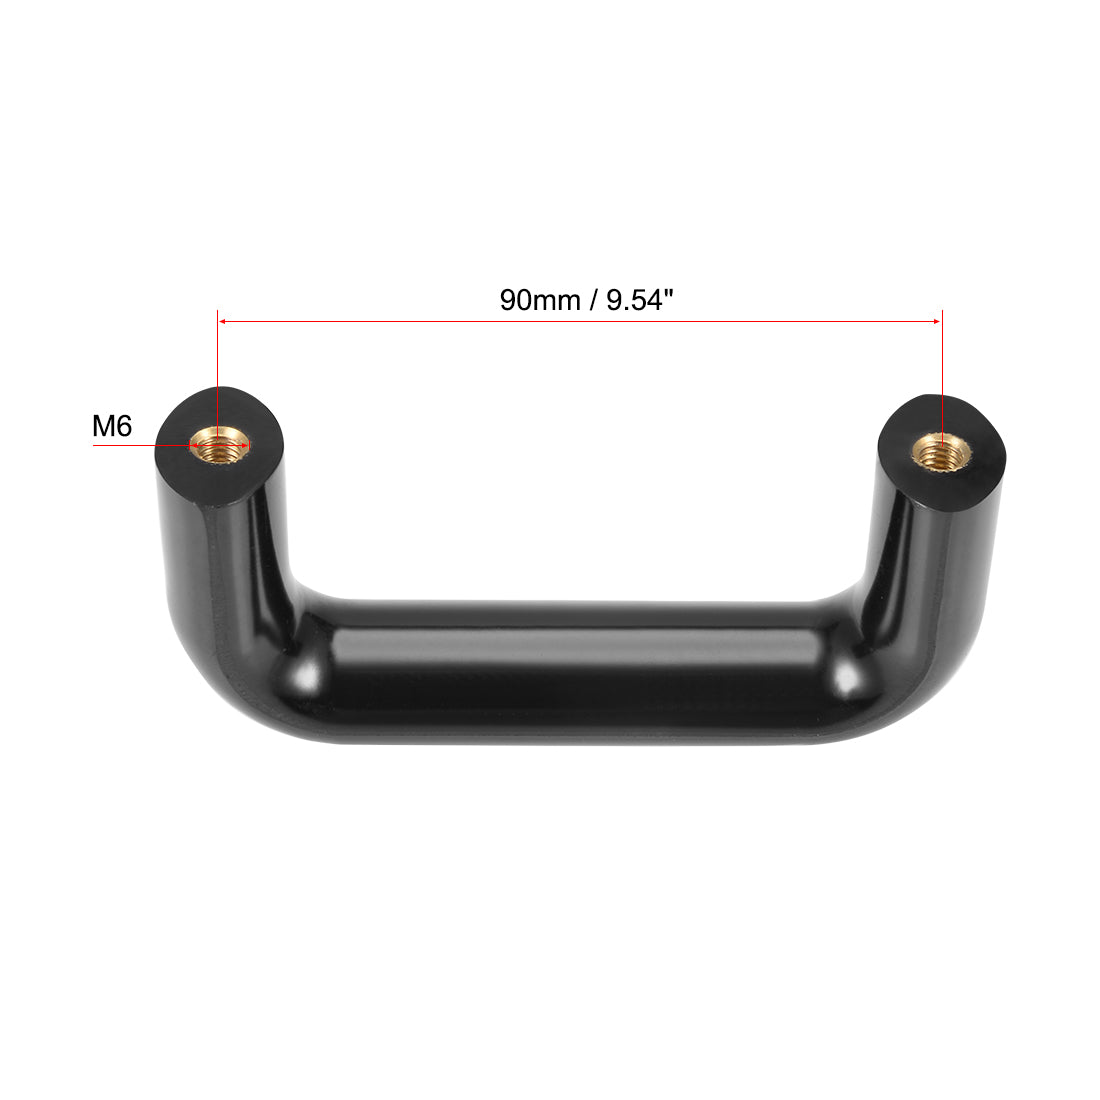 uxcell Uxcell Bakelite Plastic Pull Handle 90mm Hole Centers Black for Industrial Machine, M6 Thread